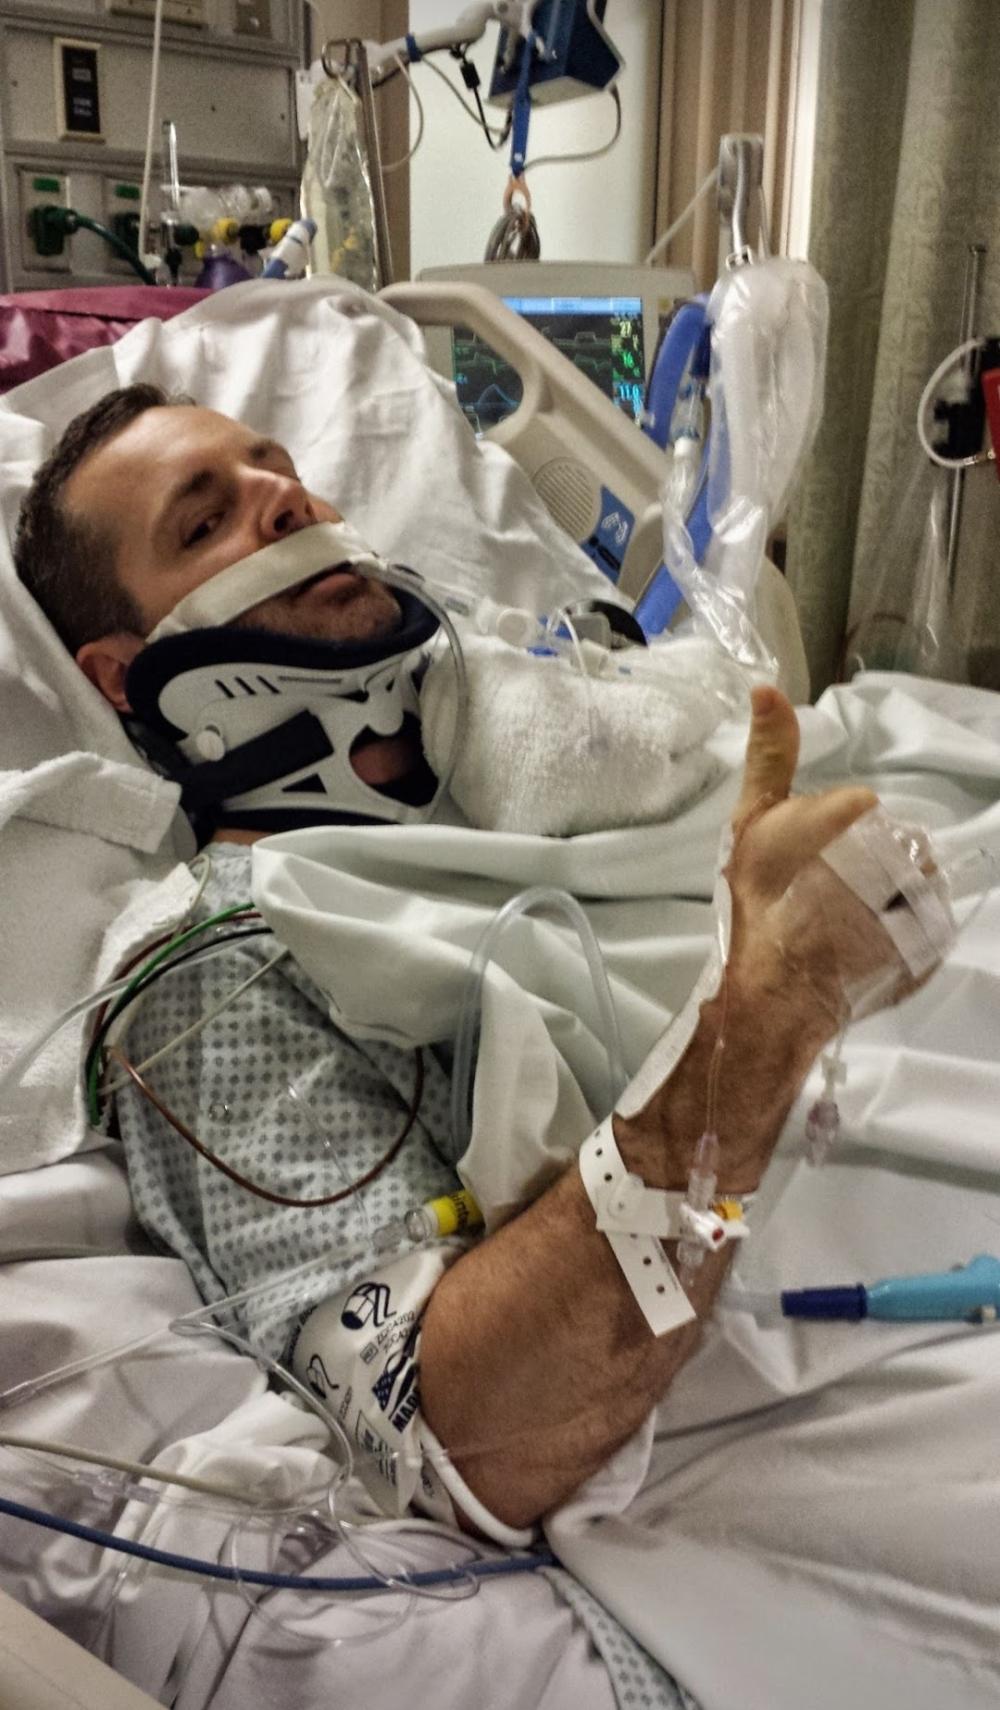 David Christopher in a hospital bed, attached to a ventilator and various medical devices l following his motorcycle accident. A picture of David Christopher in November 2010. He was a US Army Captain with the 414th Civil Affairs Battalion as part of the United States Civil Affairs and Psychological Operations Command. Image courtesy of David Christopher.